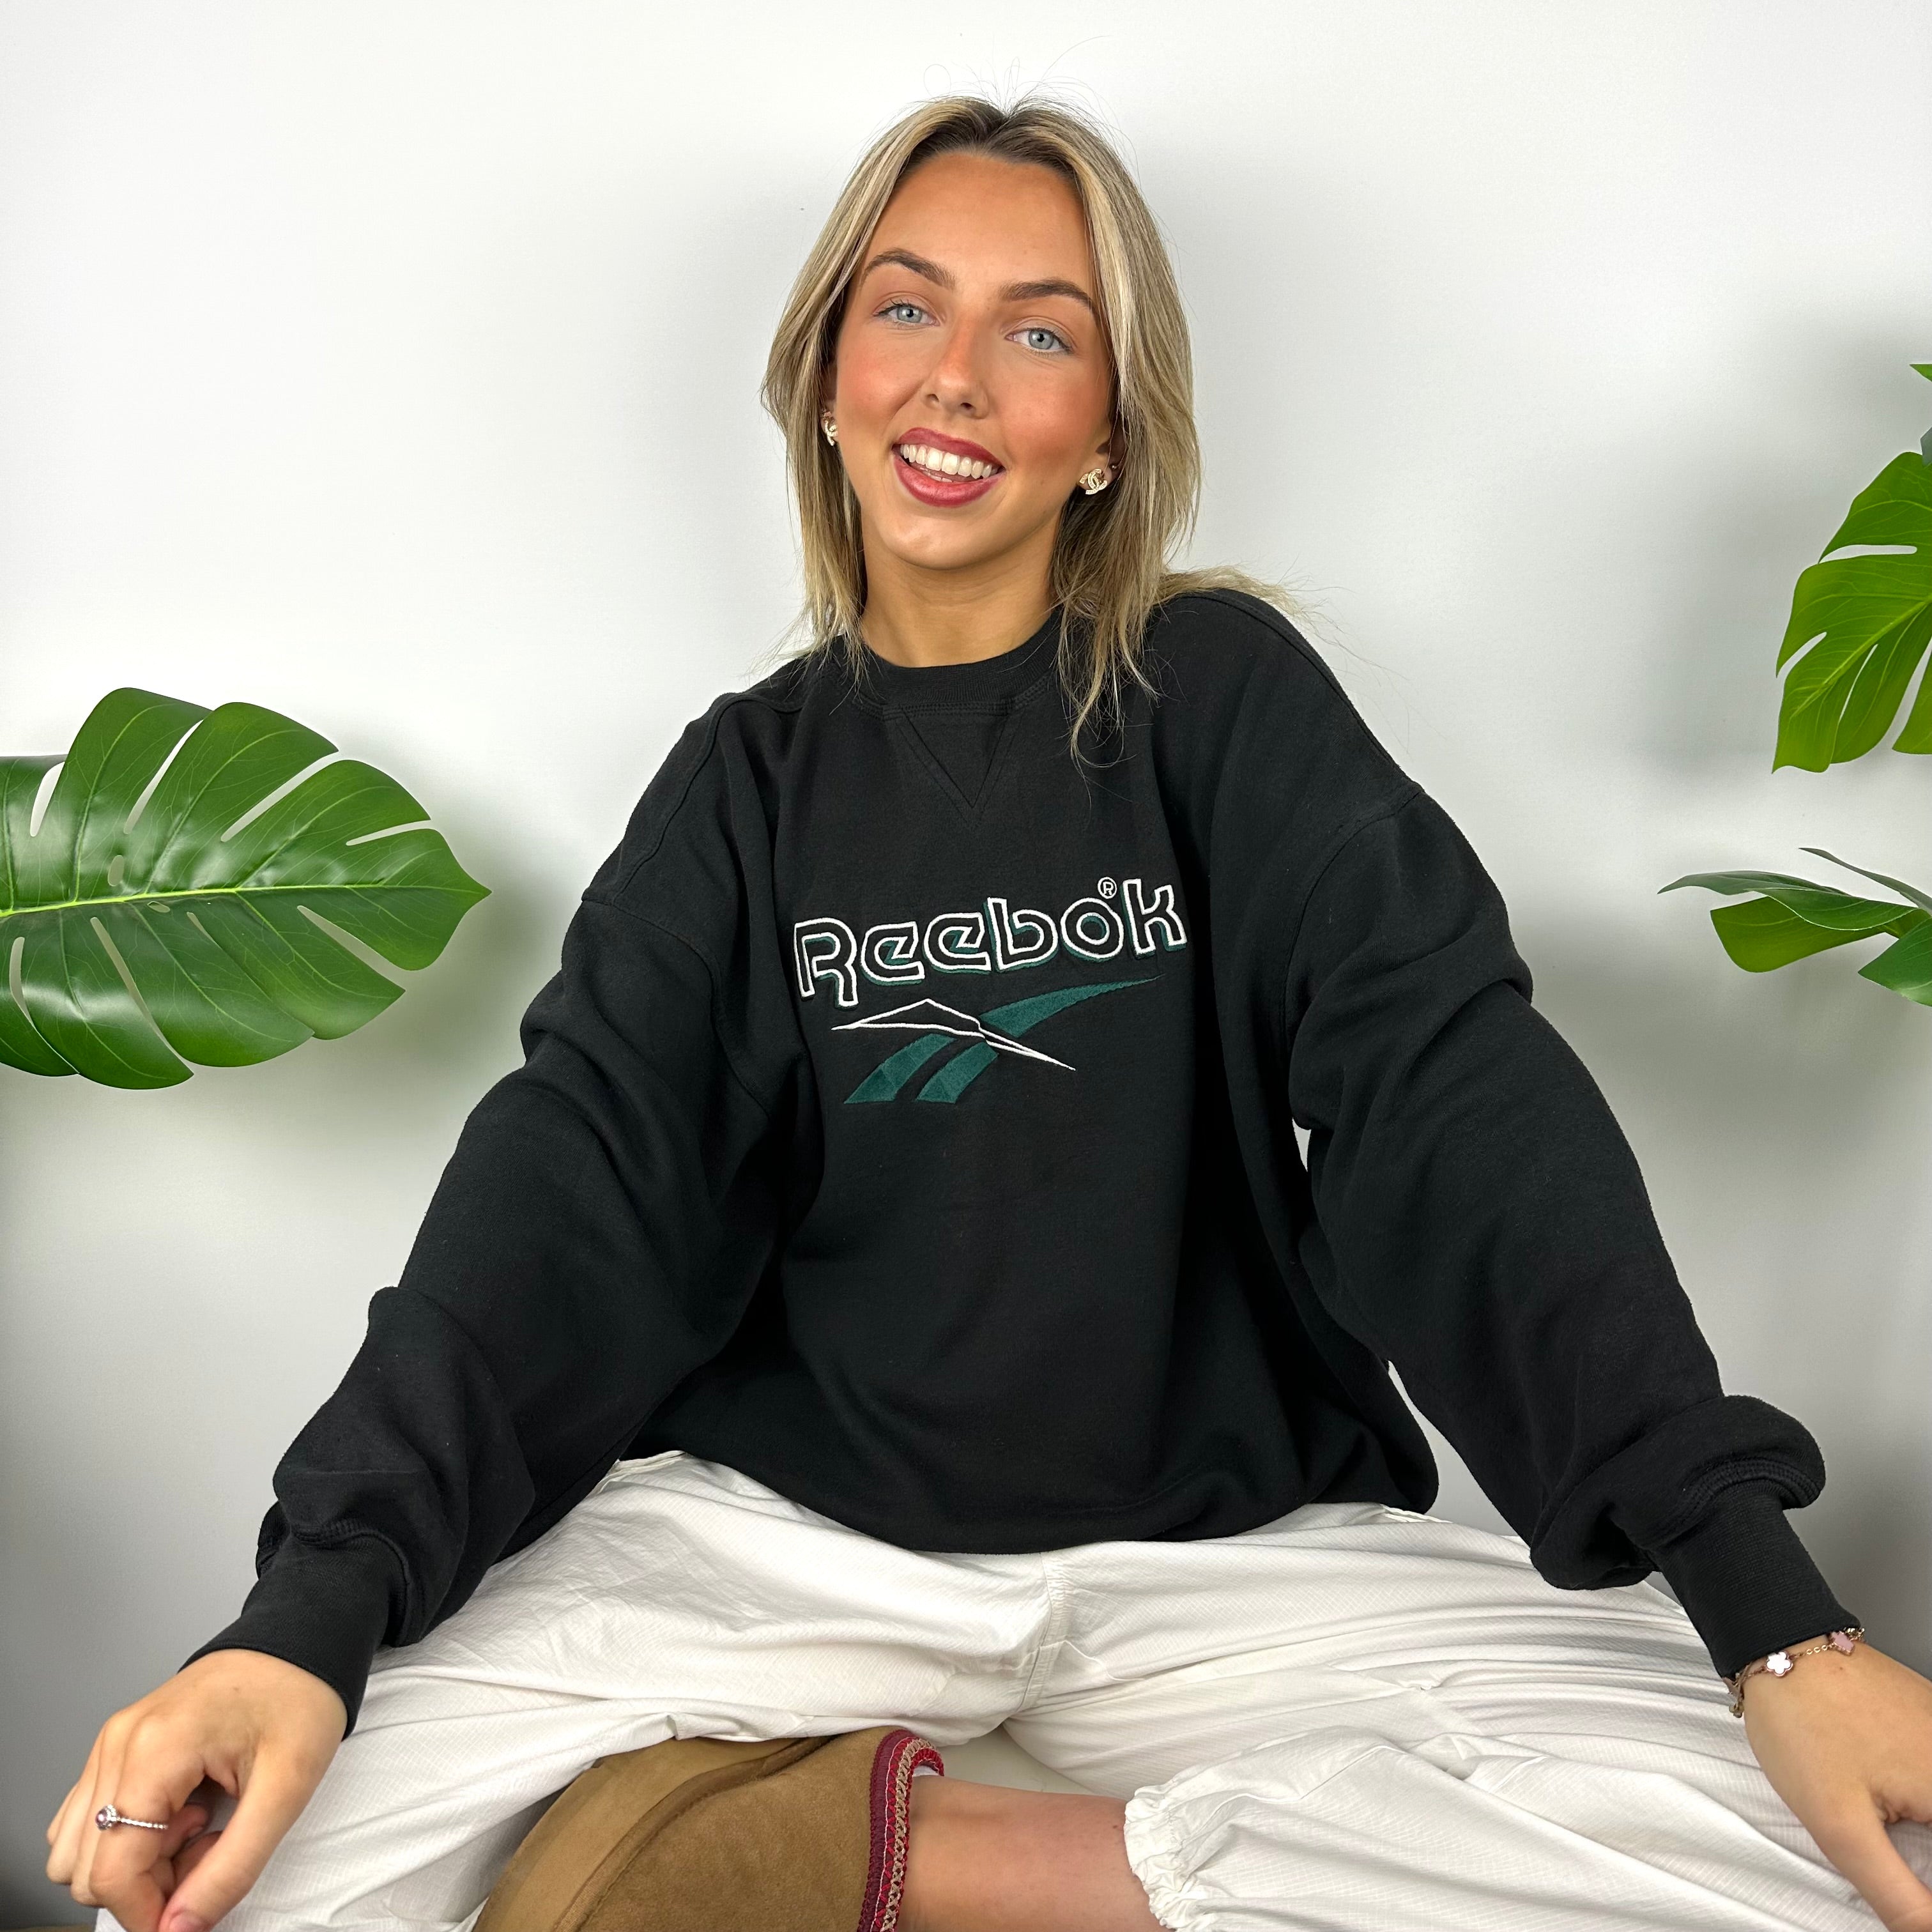 Reebok Black Embroidered Spell Out Sweatshirt (M)